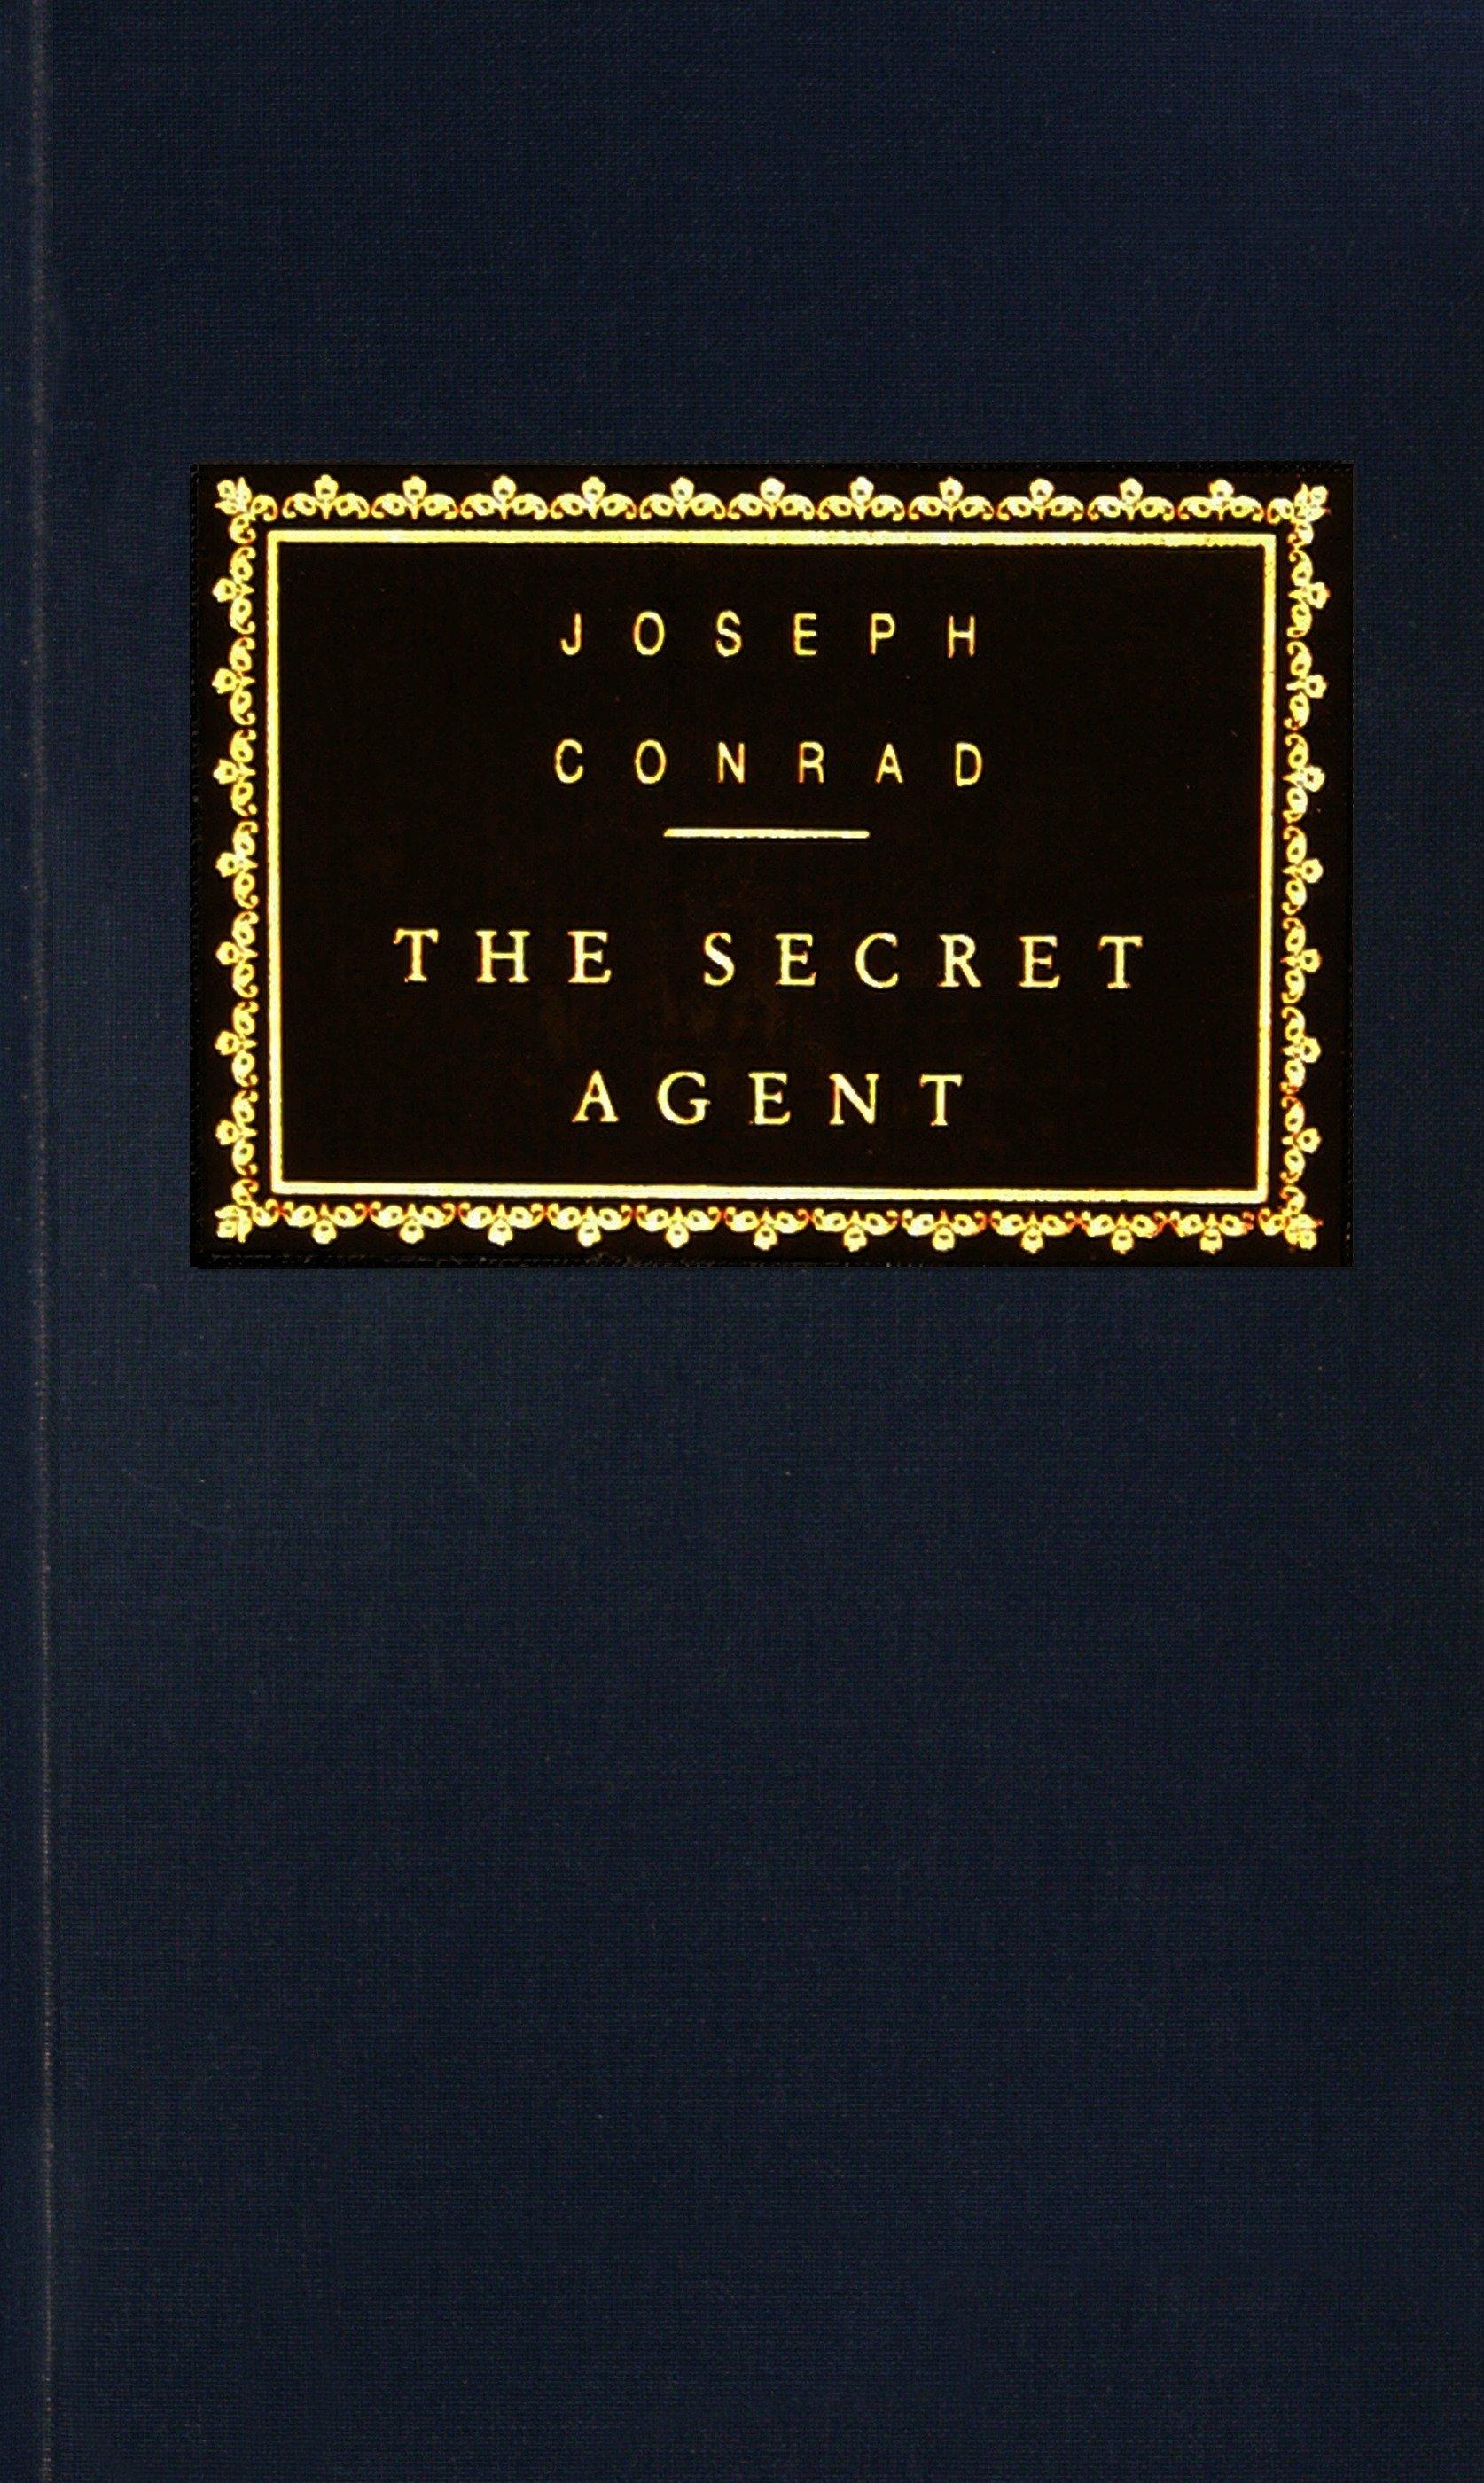 The Secret Agent: Introduction by Paul Theroux | Joseph Conrad | Buch | Everyman's Library Classics | Englisch | 1992 | Knopf Doubleday Publishing Group | EAN 9780679417231 - Conrad, Joseph